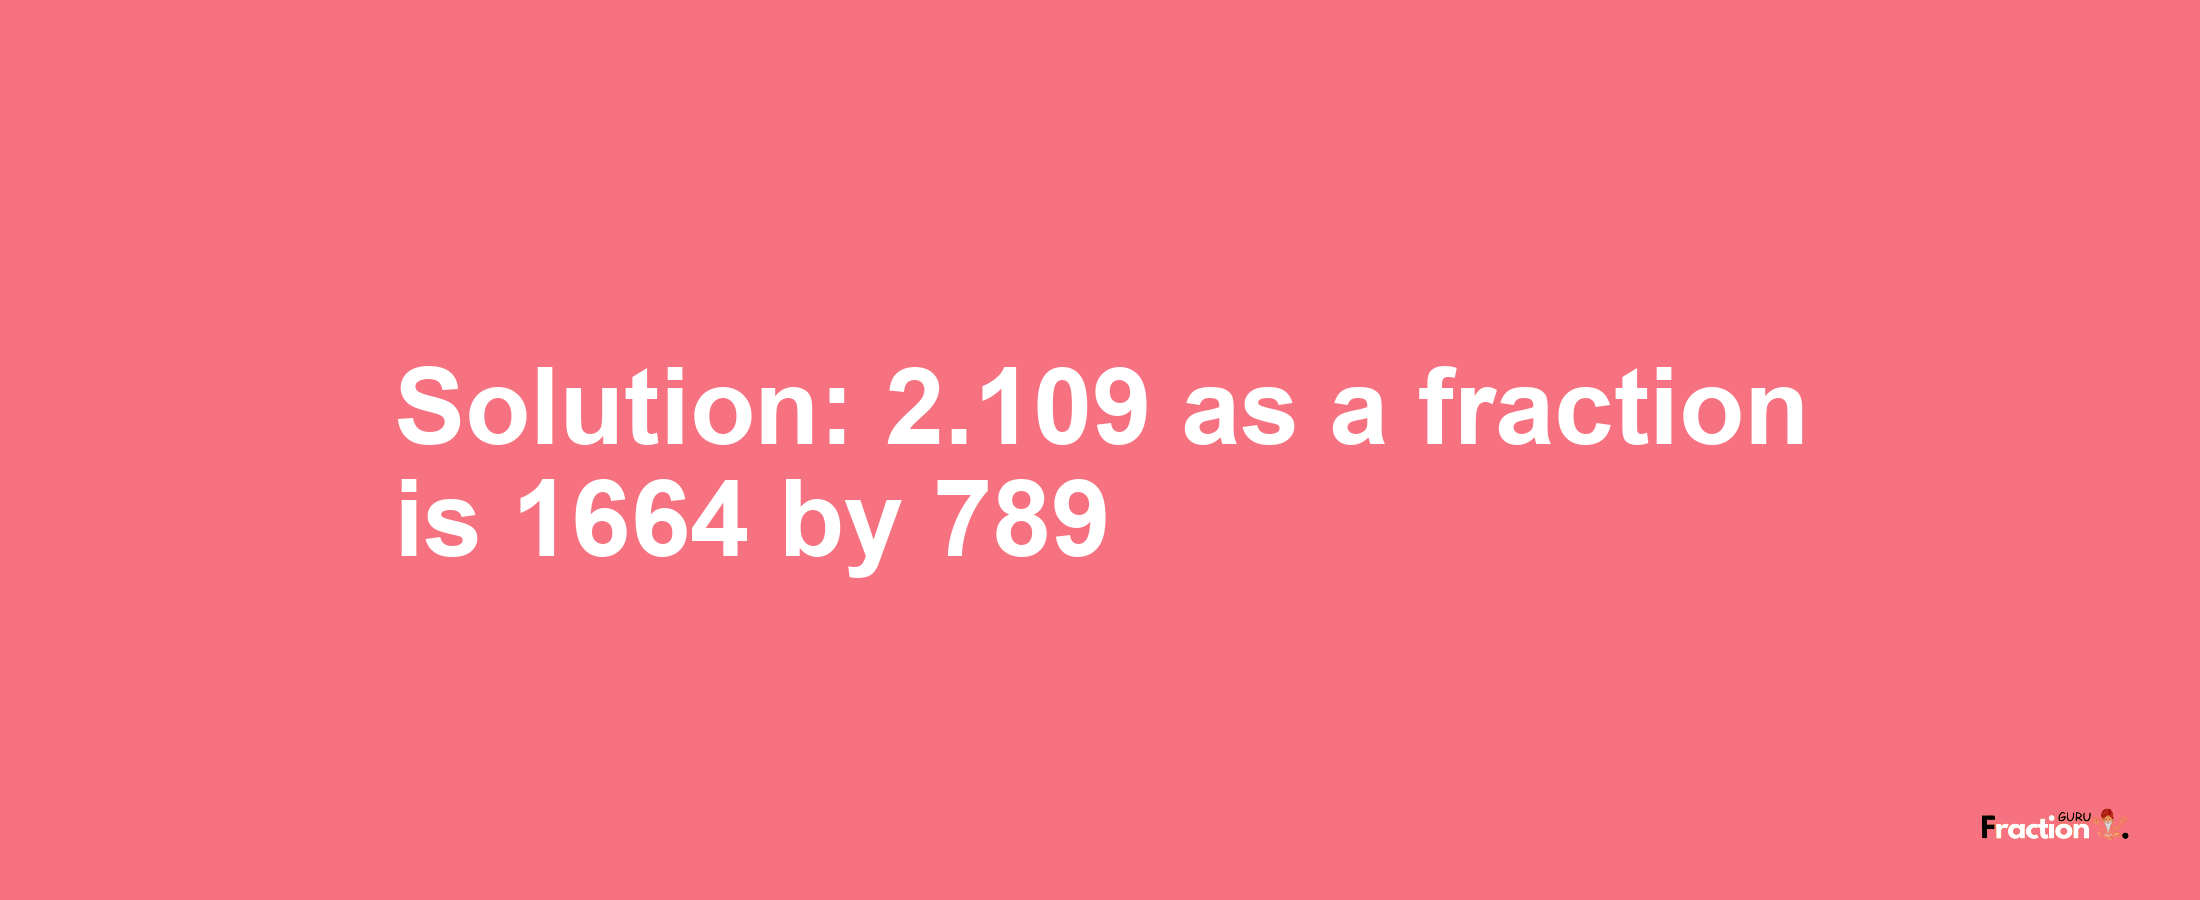 Solution:2.109 as a fraction is 1664/789